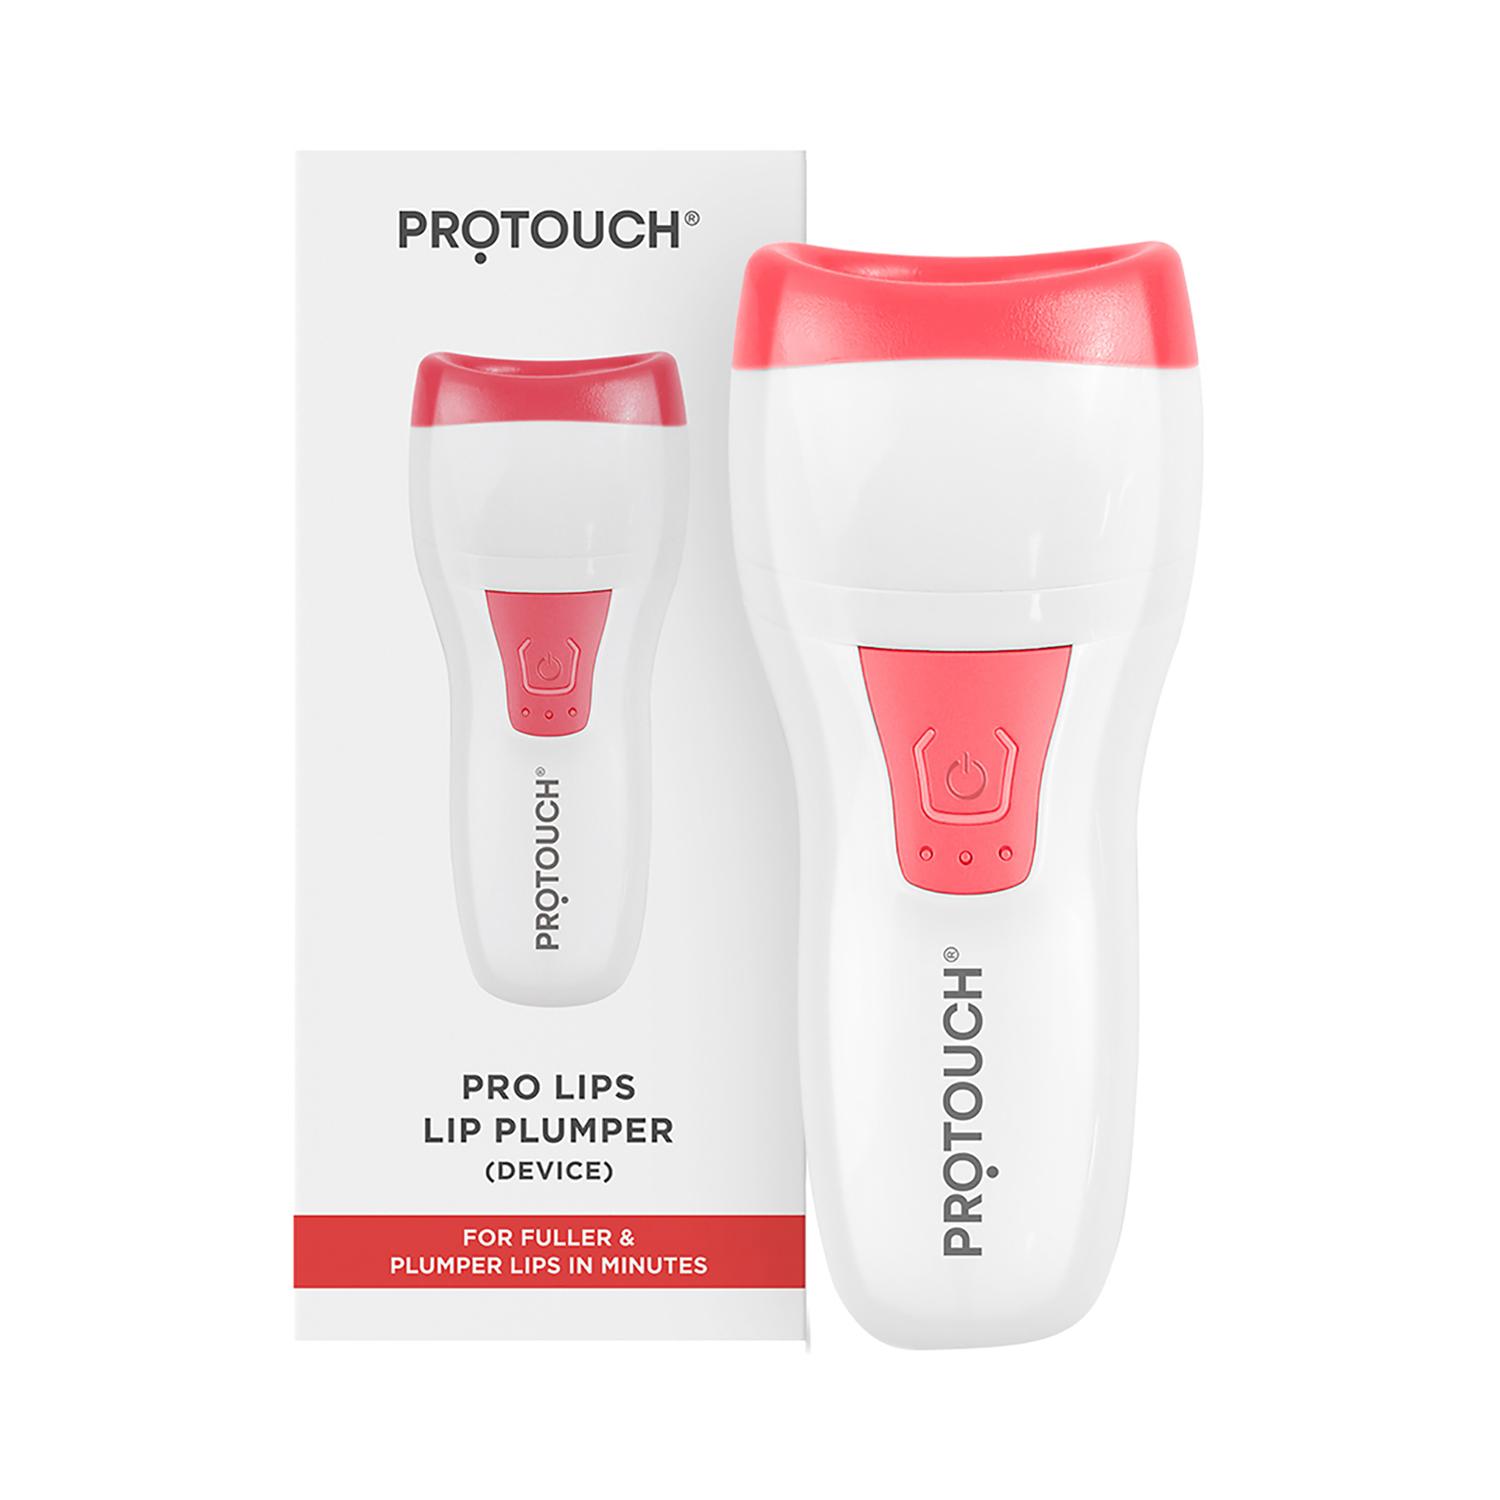 Protouch | Protouch Pro Lips Lip Plumper Device - Red and White